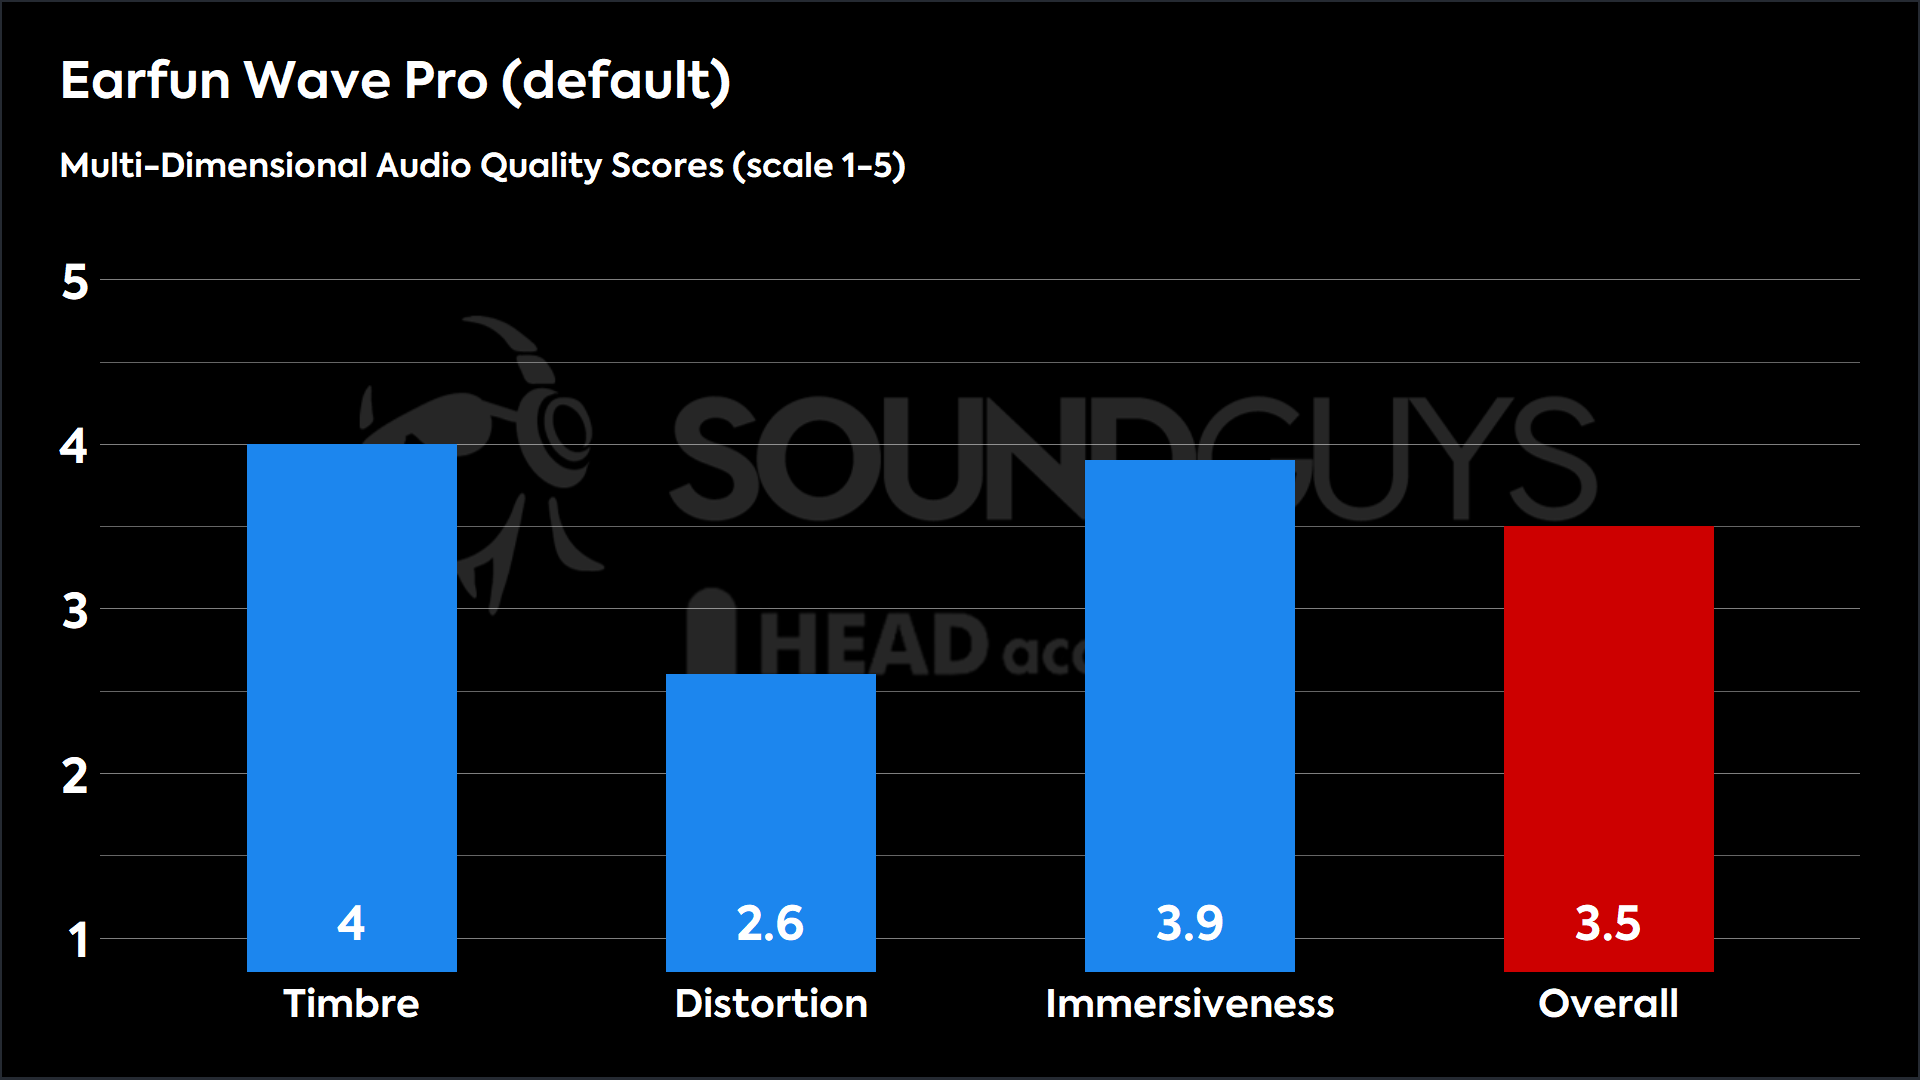 This chart shows the MDAQS results for the Earfun Wave Pro in default mode. The Timbre score is 4, The Distortion score is 2.6, the Immersiveness score is 3.9, and the Overall Score is 3.5).